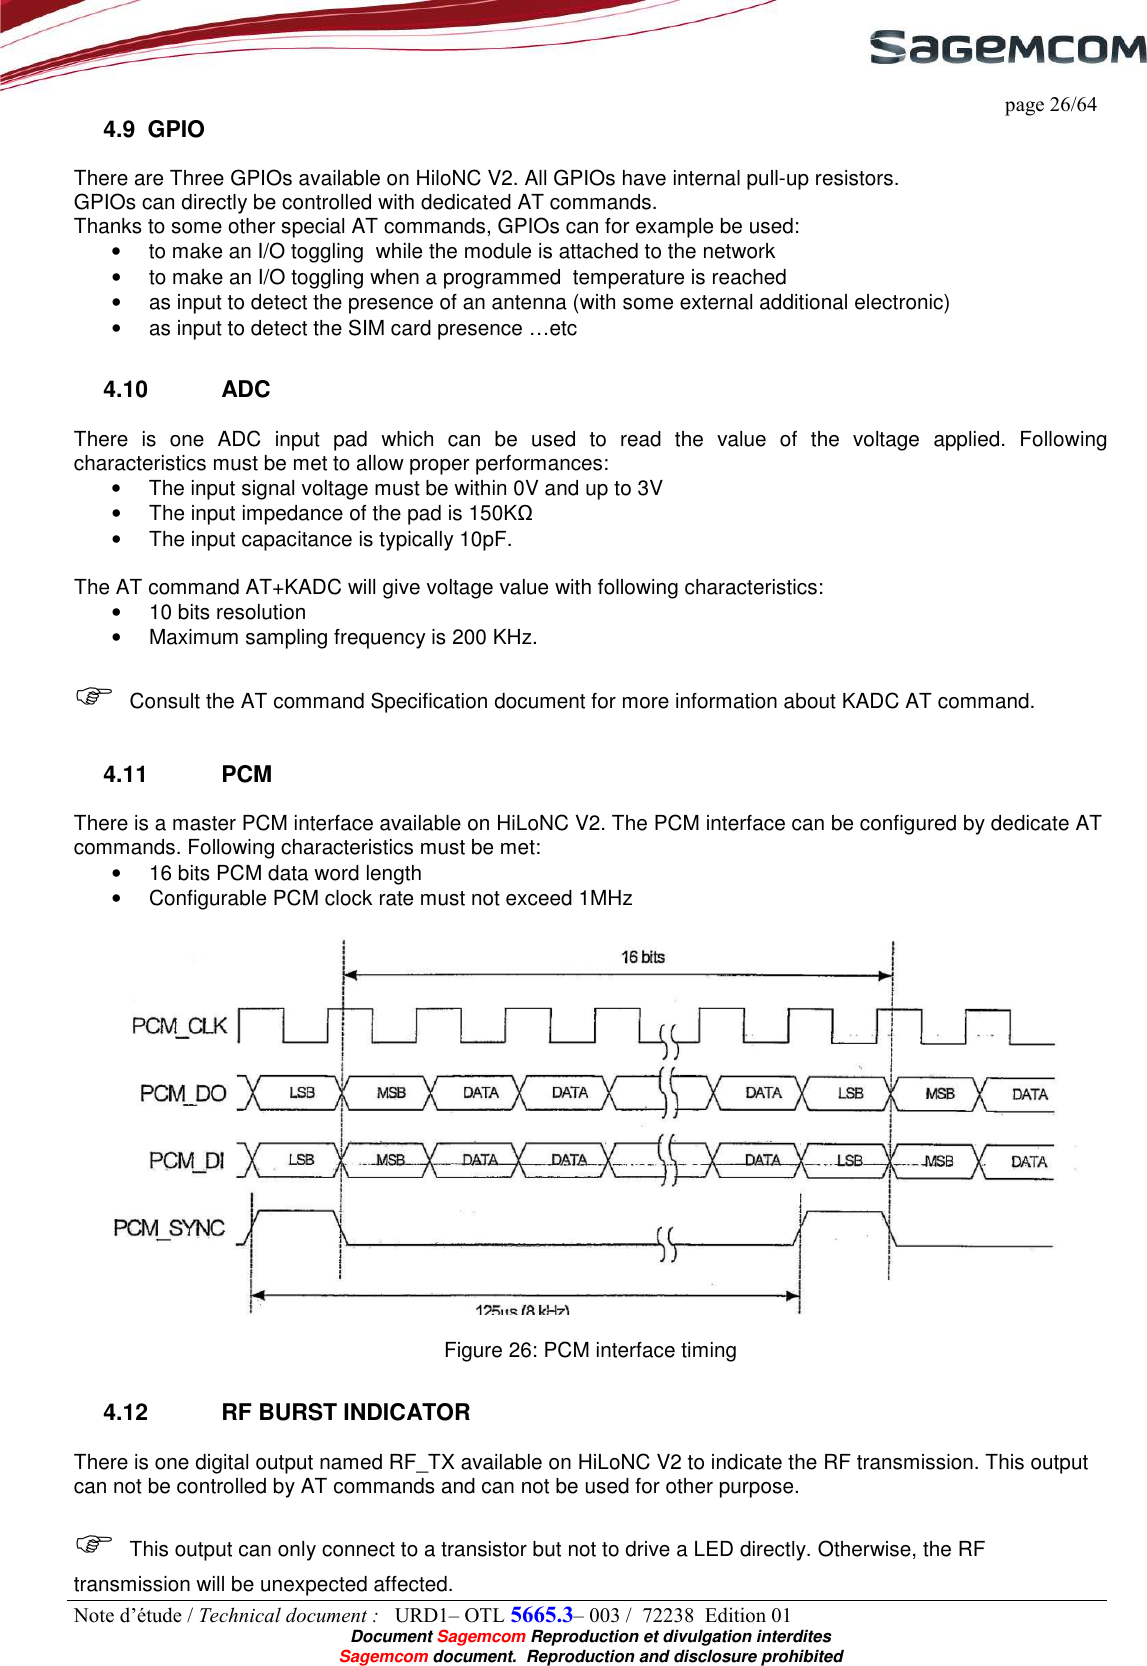     page 26/64 Note d’étude / Technical document :   URD1– OTL 5665.3– 003 /  72238  Edition 01  Document Sagemcom Reproduction et divulgation interdites Sagemcom document.  Reproduction and disclosure prohibited 4.9  GPIO There are Three GPIOs available on HiloNC V2. All GPIOs have internal pull-up resistors.  GPIOs can directly be controlled with dedicated AT commands. Thanks to some other special AT commands, GPIOs can for example be used: •  to make an I/O toggling  while the module is attached to the network  •  to make an I/O toggling when a programmed  temperature is reached •  as input to detect the presence of an antenna (with some external additional electronic) •  as input to detect the SIM card presence …etc 4.10  ADC There  is  one  ADC  input  pad  which  can  be  used  to  read  the  value  of  the  voltage  applied.  Following characteristics must be met to allow proper performances: •  The input signal voltage must be within 0V and up to 3V •  The input impedance of the pad is 150KΩ •  The input capacitance is typically 10pF.  The AT command AT+KADC will give voltage value with following characteristics: •  10 bits resolution •  Maximum sampling frequency is 200 KHz.   Consult the AT command Specification document for more information about KADC AT command. 4.11  PCM There is a master PCM interface available on HiLoNC V2. The PCM interface can be configured by dedicate AT commands. Following characteristics must be met: •  16 bits PCM data word length •  Configurable PCM clock rate must not exceed 1MHz    Figure 26: PCM interface timing  4.12  RF BURST INDICATOR There is one digital output named RF_TX available on HiLoNC V2 to indicate the RF transmission. This output can not be controlled by AT commands and can not be used for other purpose.    This output can only connect to a transistor but not to drive a LED directly. Otherwise, the RF transmission will be unexpected affected. 